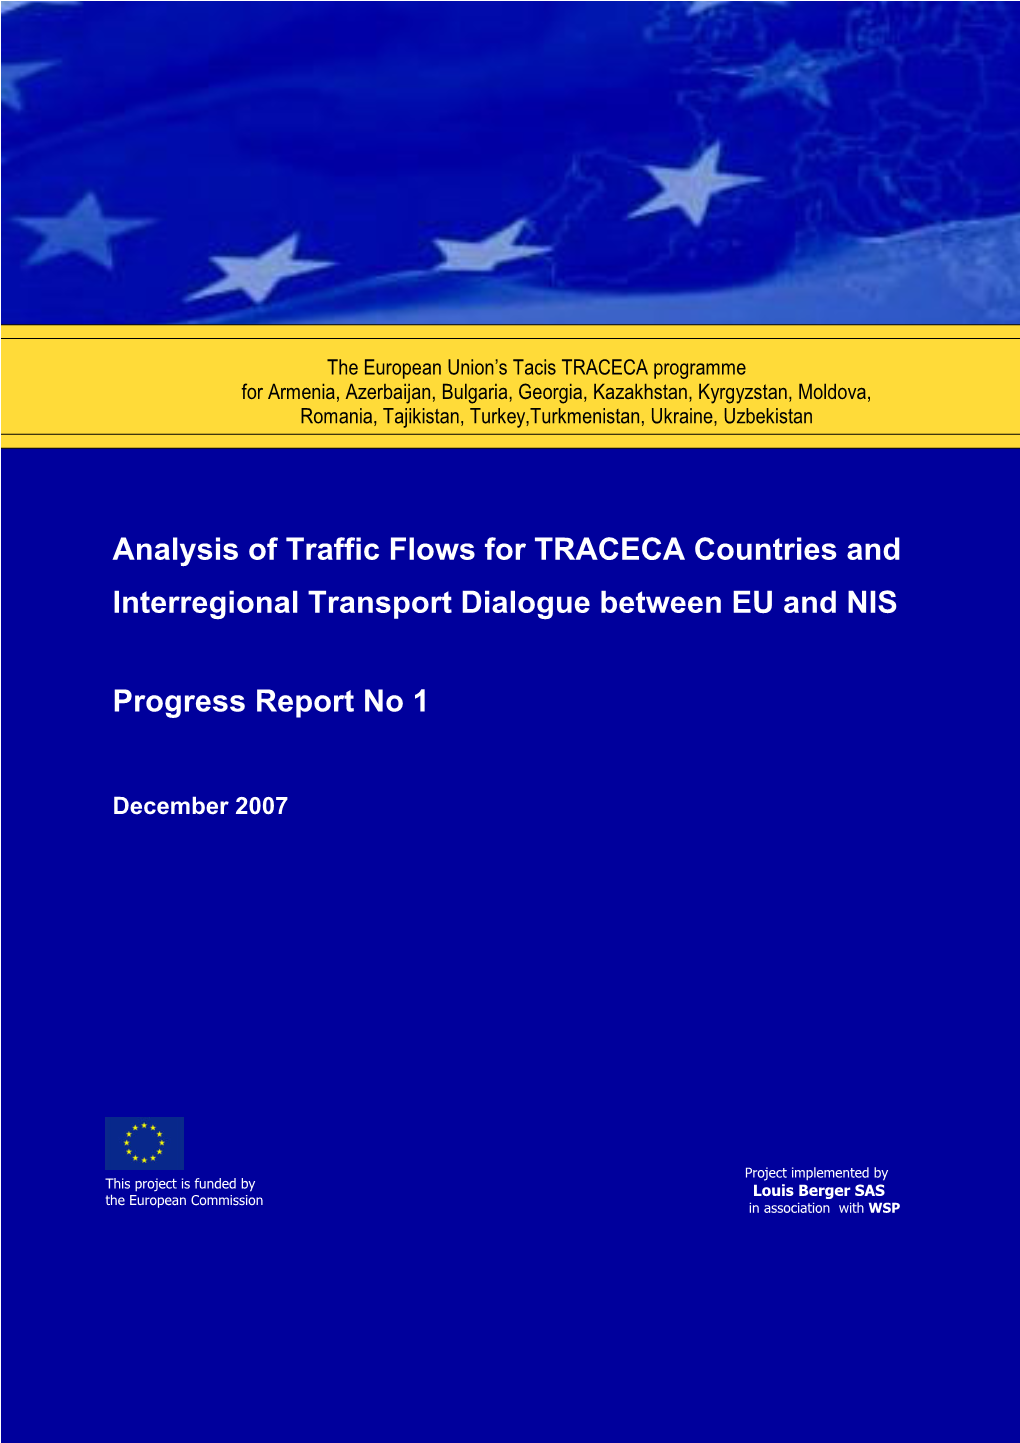 Analysis of Traffic Flows for TRACECA Countries and Interregional Transport Dialogue Between EU and NIS